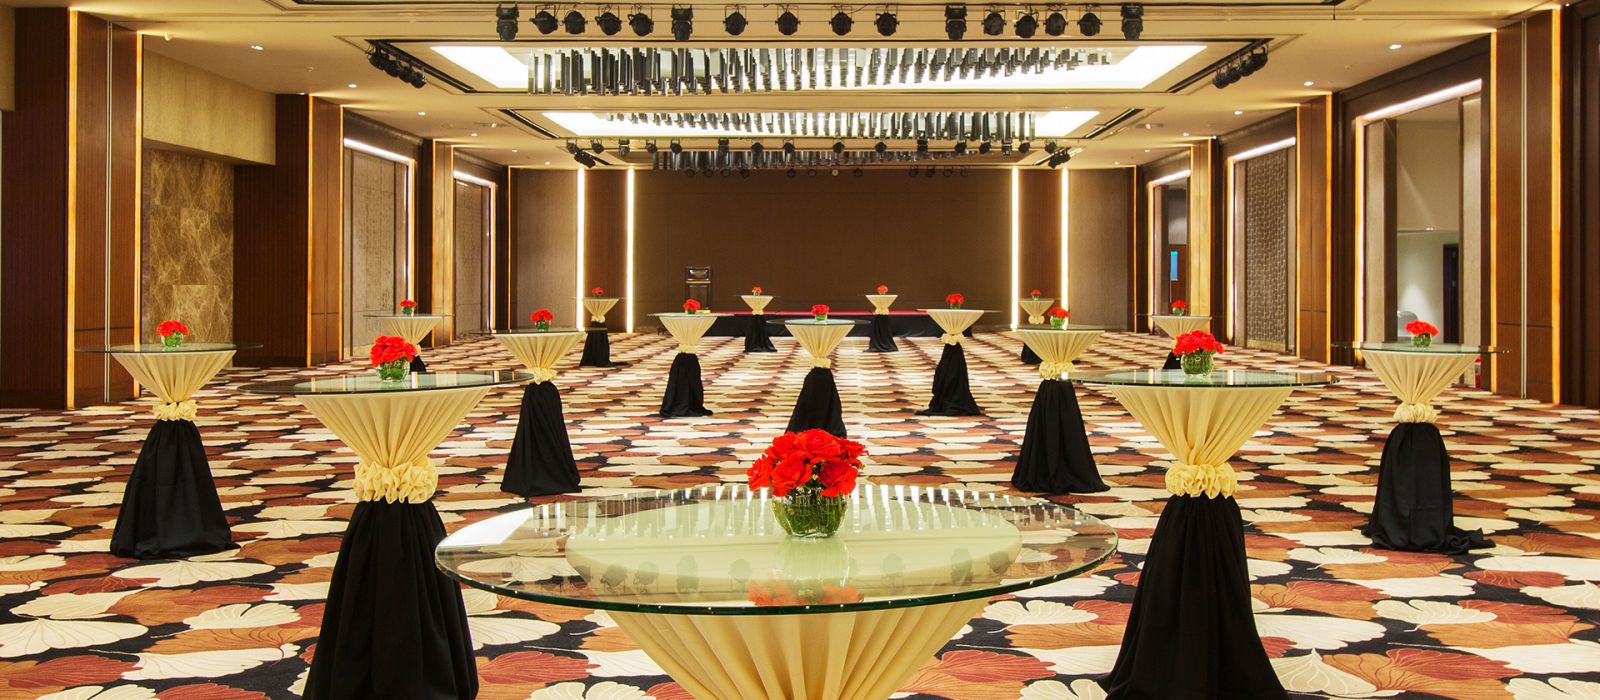 Accommodating up to 1,200 guests, the Cebu Grand Ballroom with city views and natural light is the hotel&#x27;s centrepiece venue for grand affairs and social events. The elegant space can be configured into smaller areas, each with its own entrance, and is equipped with modern audio-visual technology.